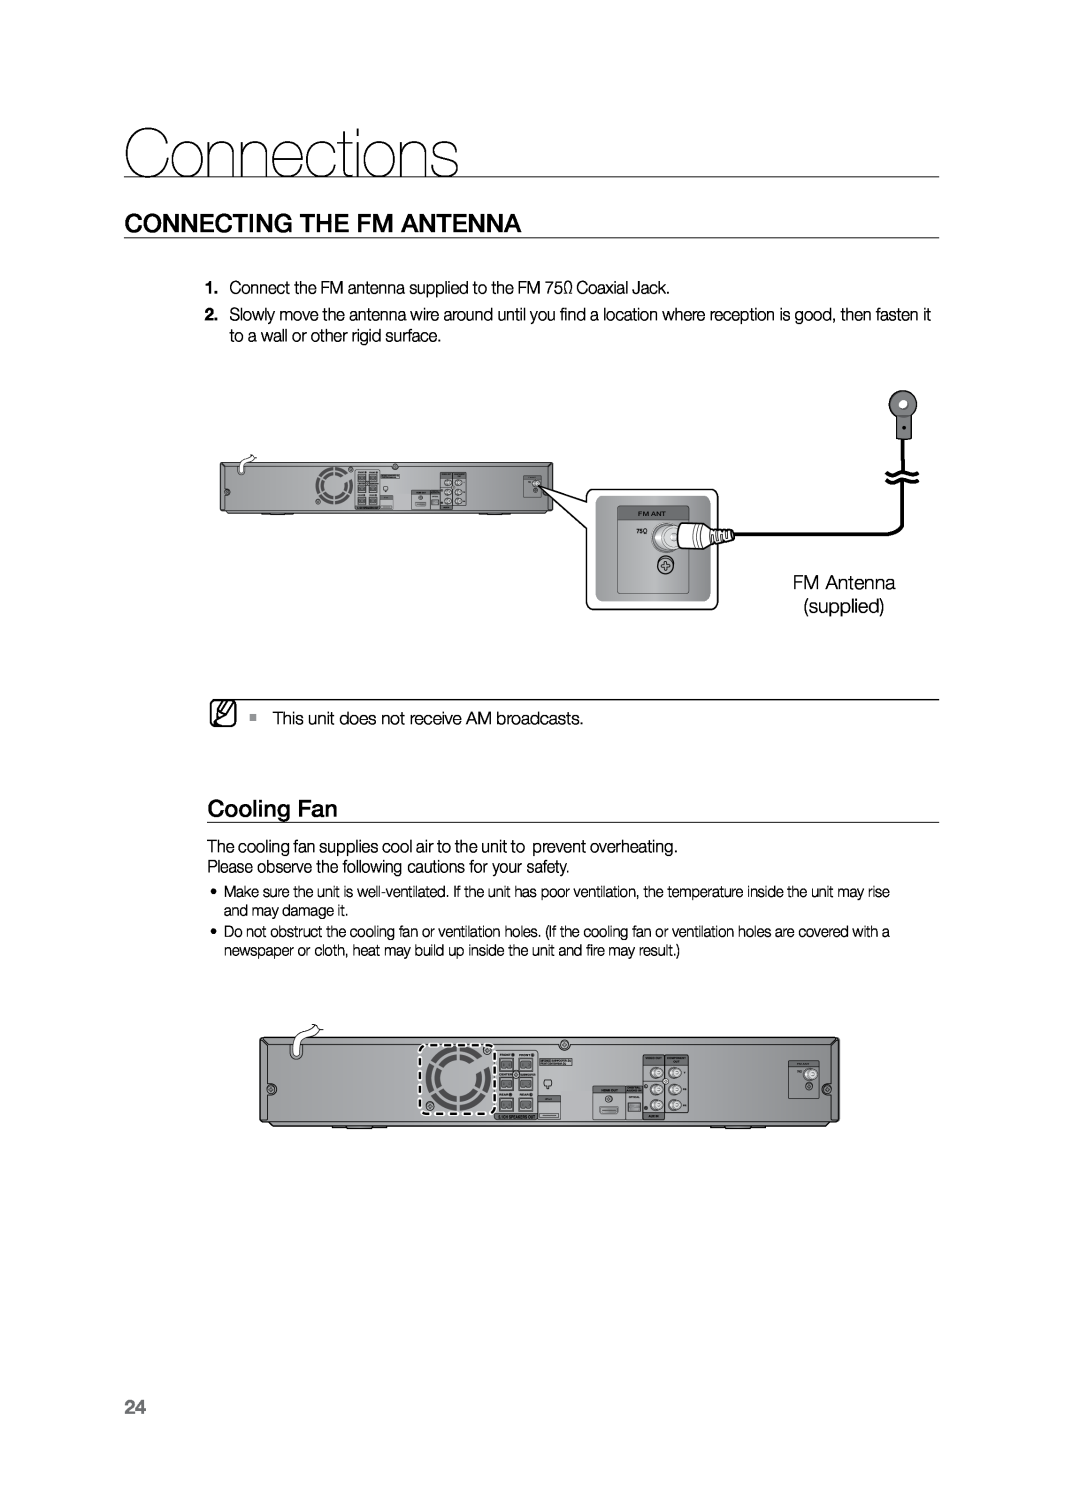 Samsung HT-Z221 user manual Connecting the FM Antenna, Cooling Fan, Connections 